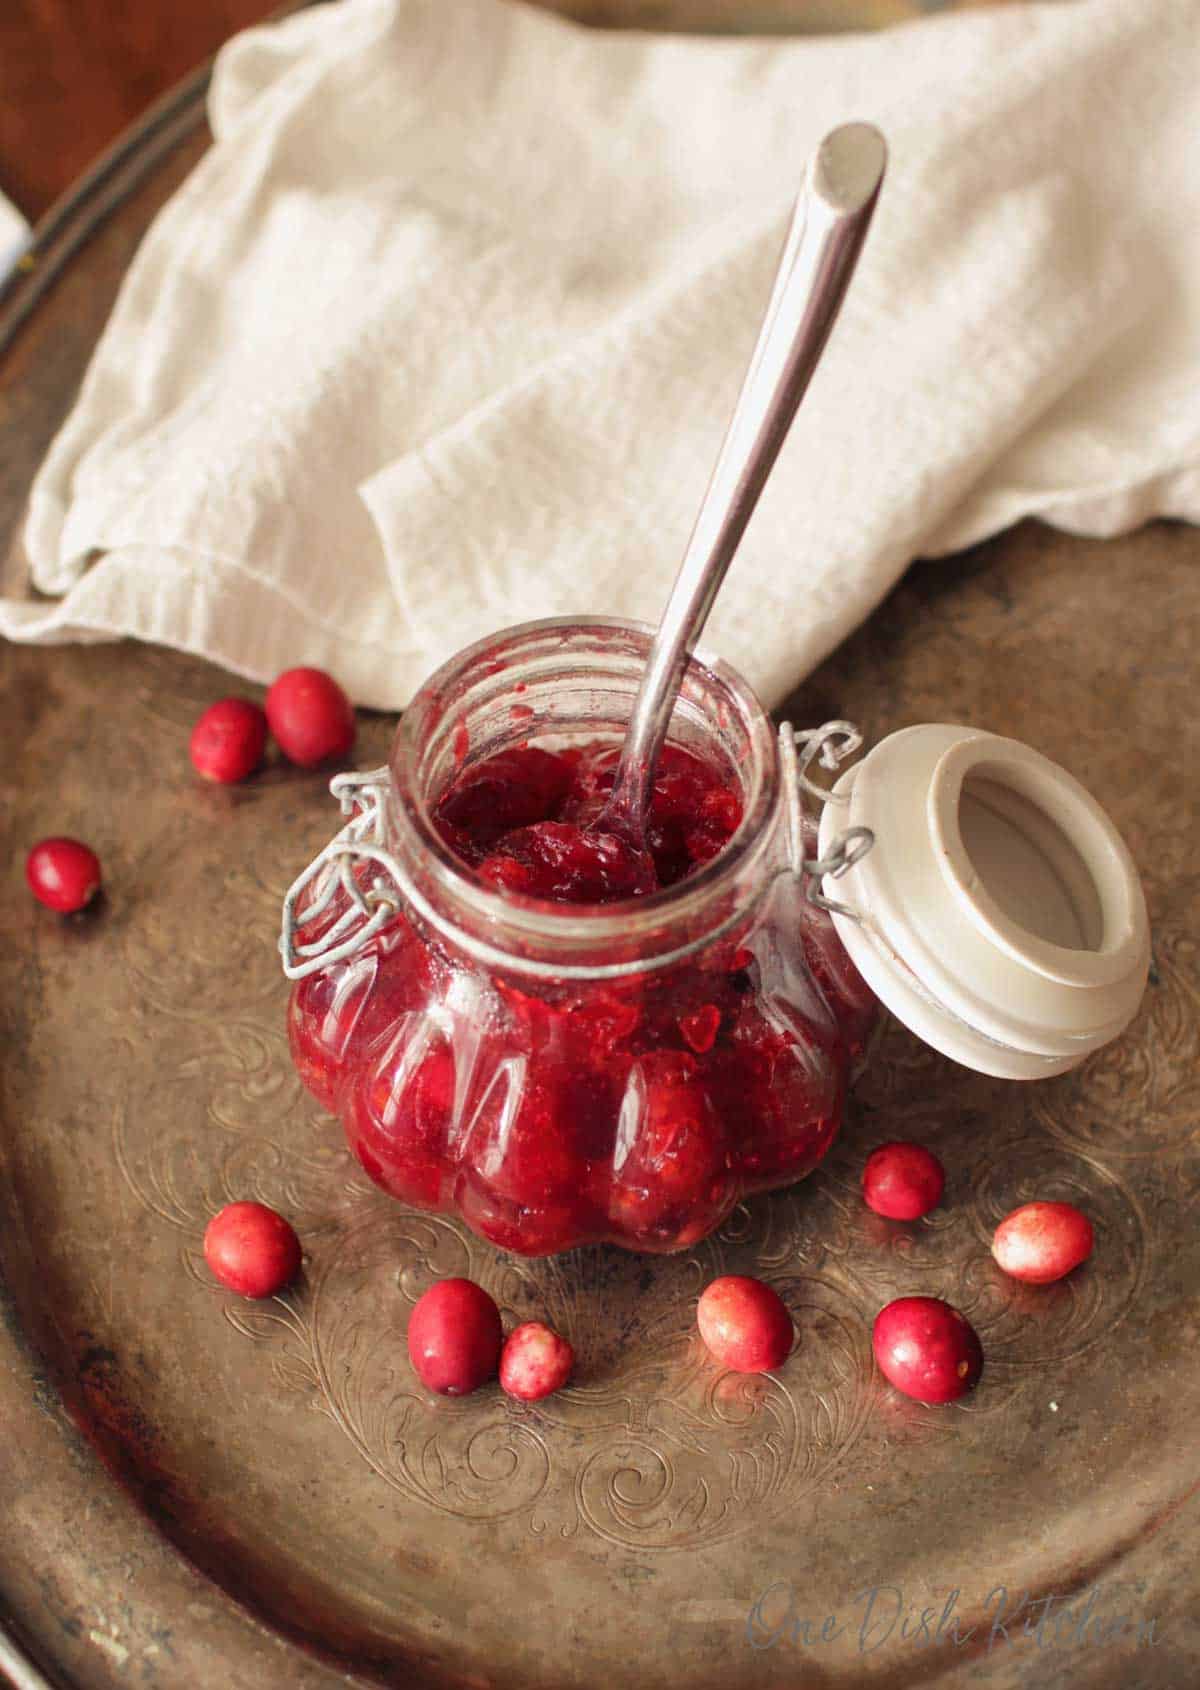 An overhead view of a jar of cranberry jam with a spoon on a metal tray with scattered cranberries and a white cloth napkin.